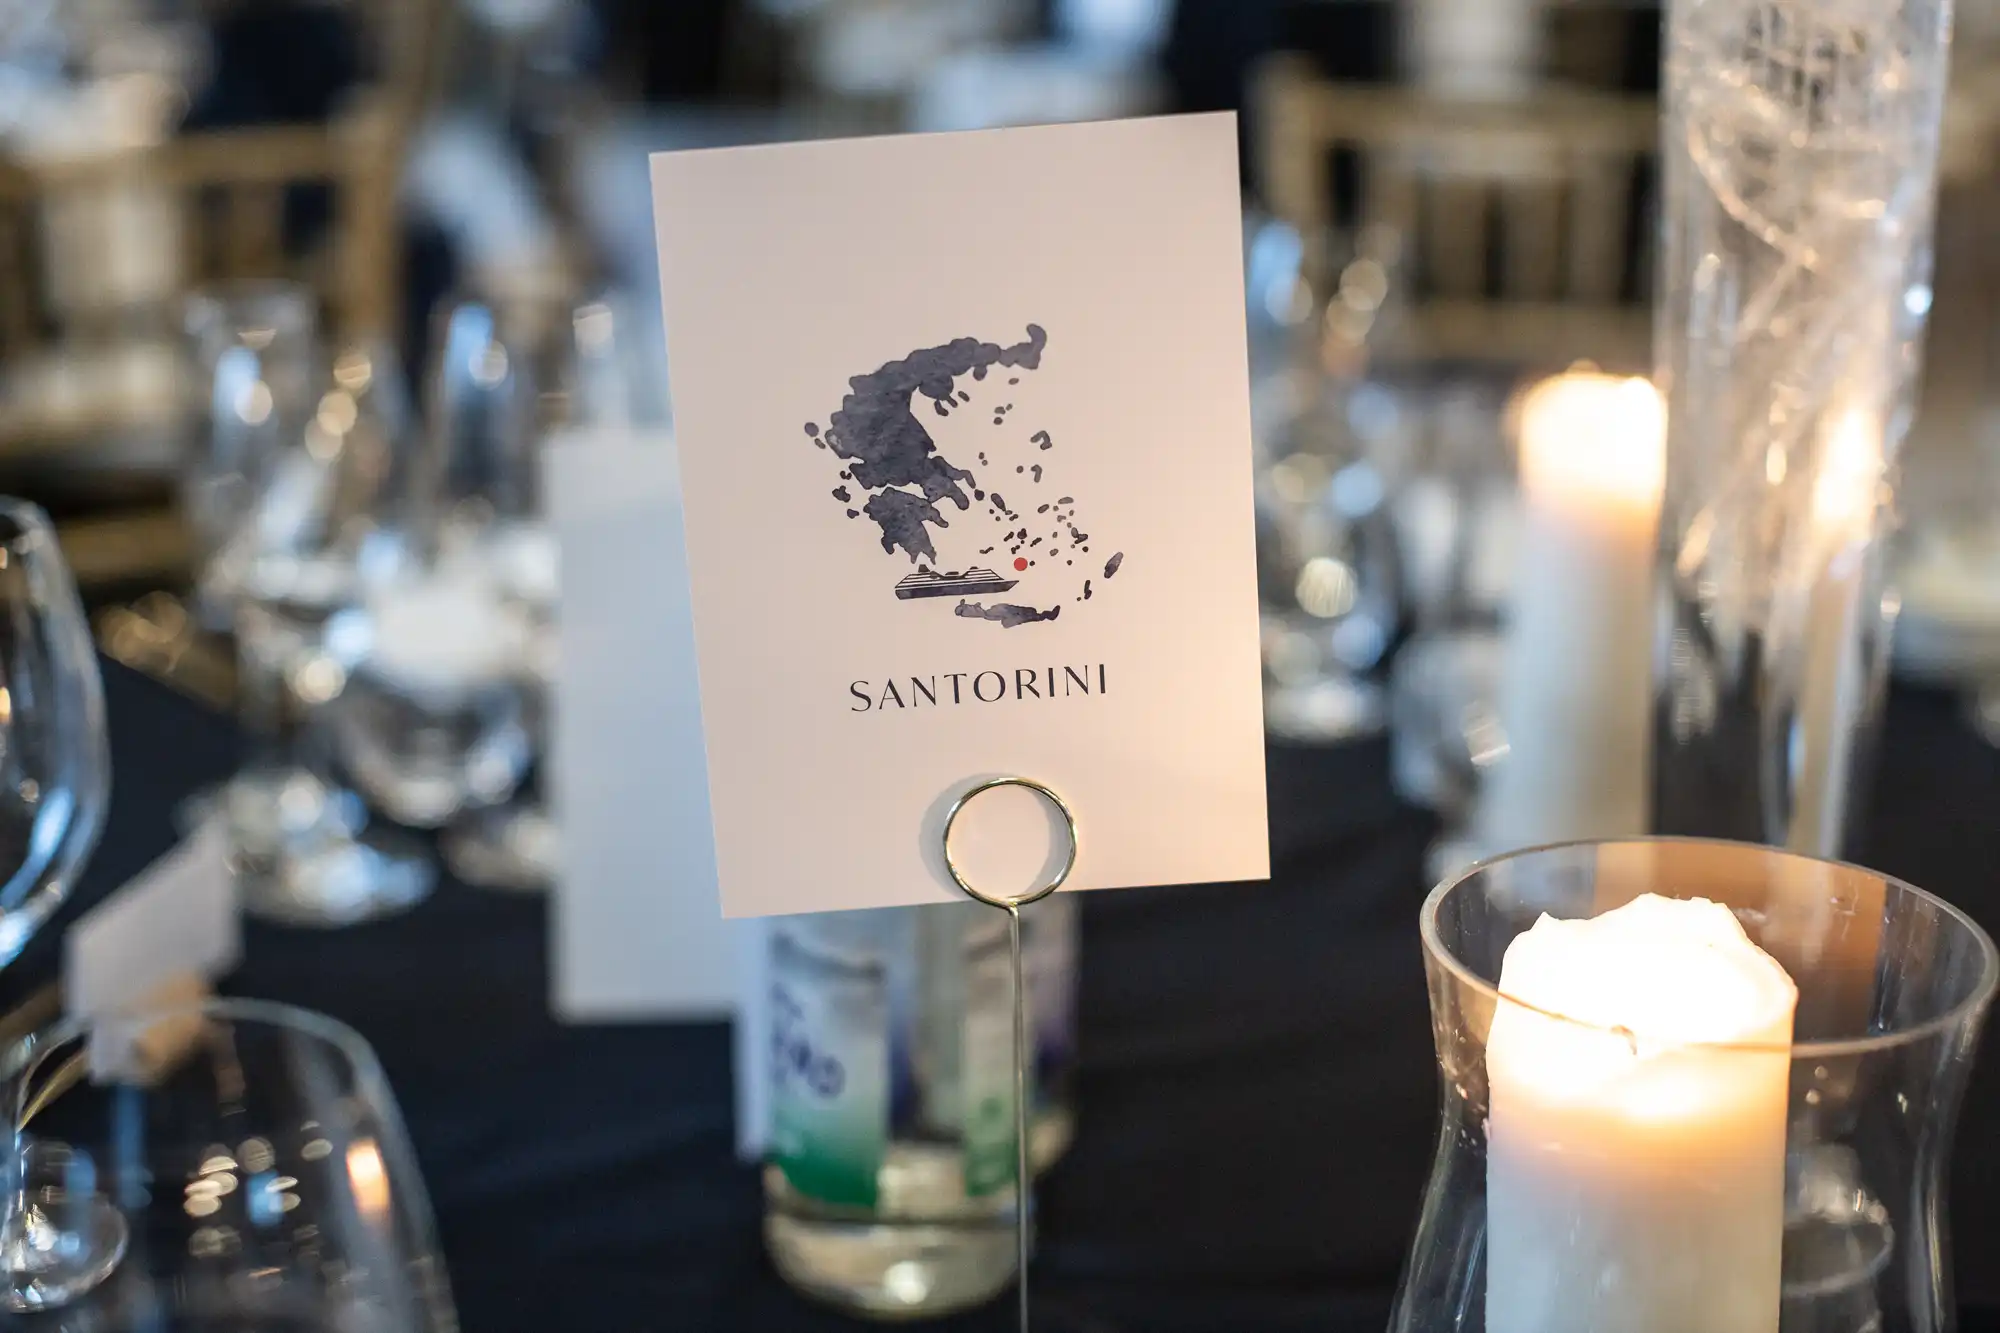 A table card labeled "Santorini" with a map illustration is placed in a holder on a well-set dining table with glasses, candles, and a decorative centerpiece.